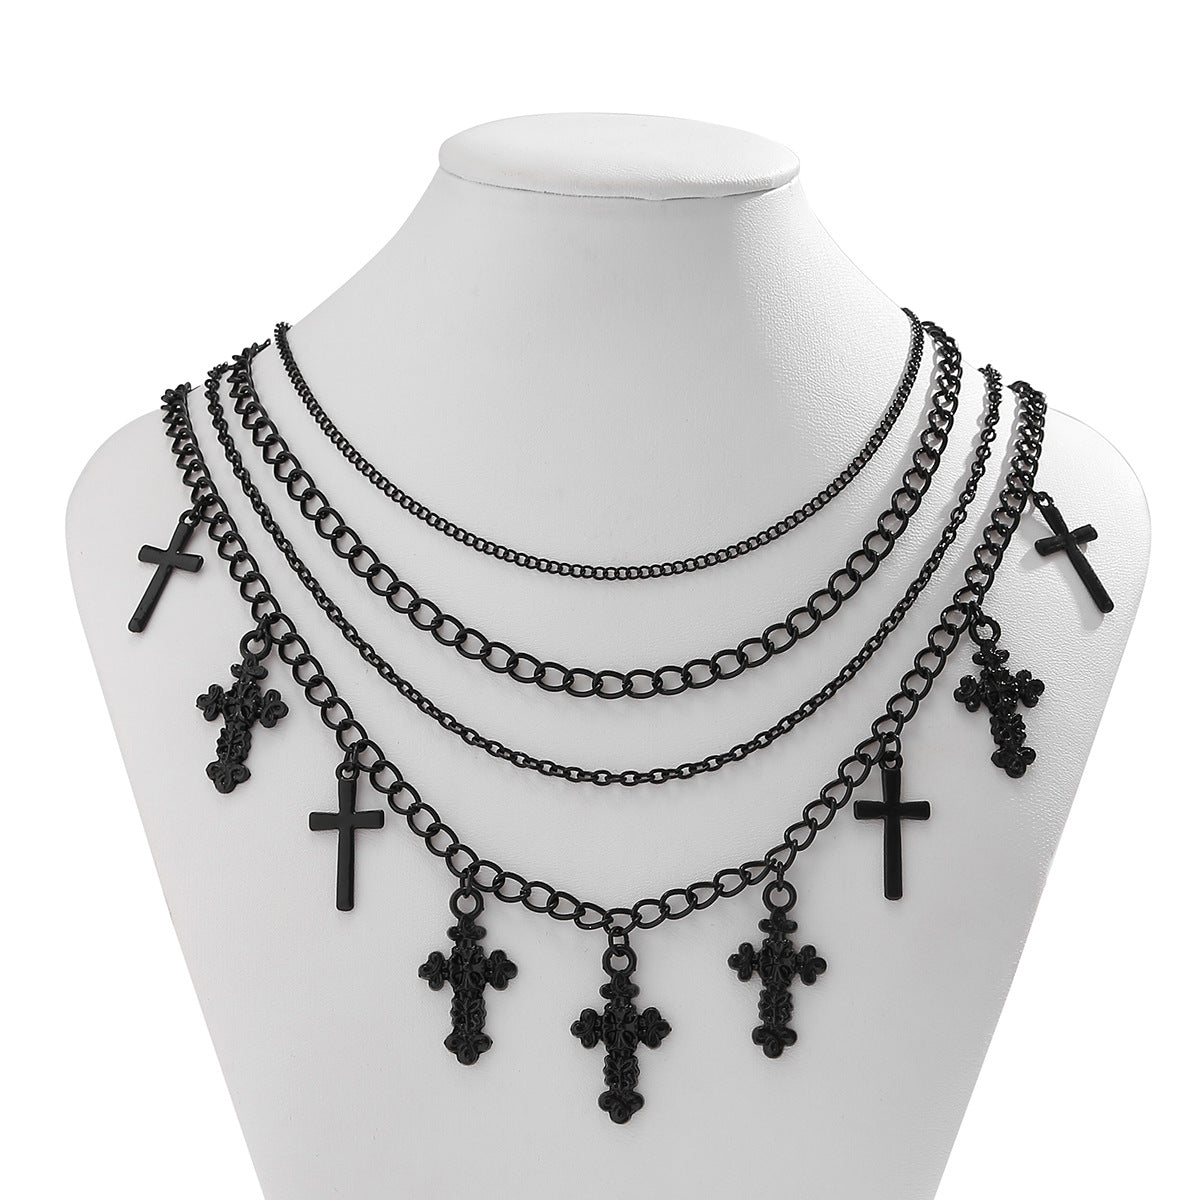 European and American Cross Border Jewelry: Halloween Multi-layer Cross Tassel Necklace, Feminine Spicy Girl Chain, Black Sweet and Cool Necklace